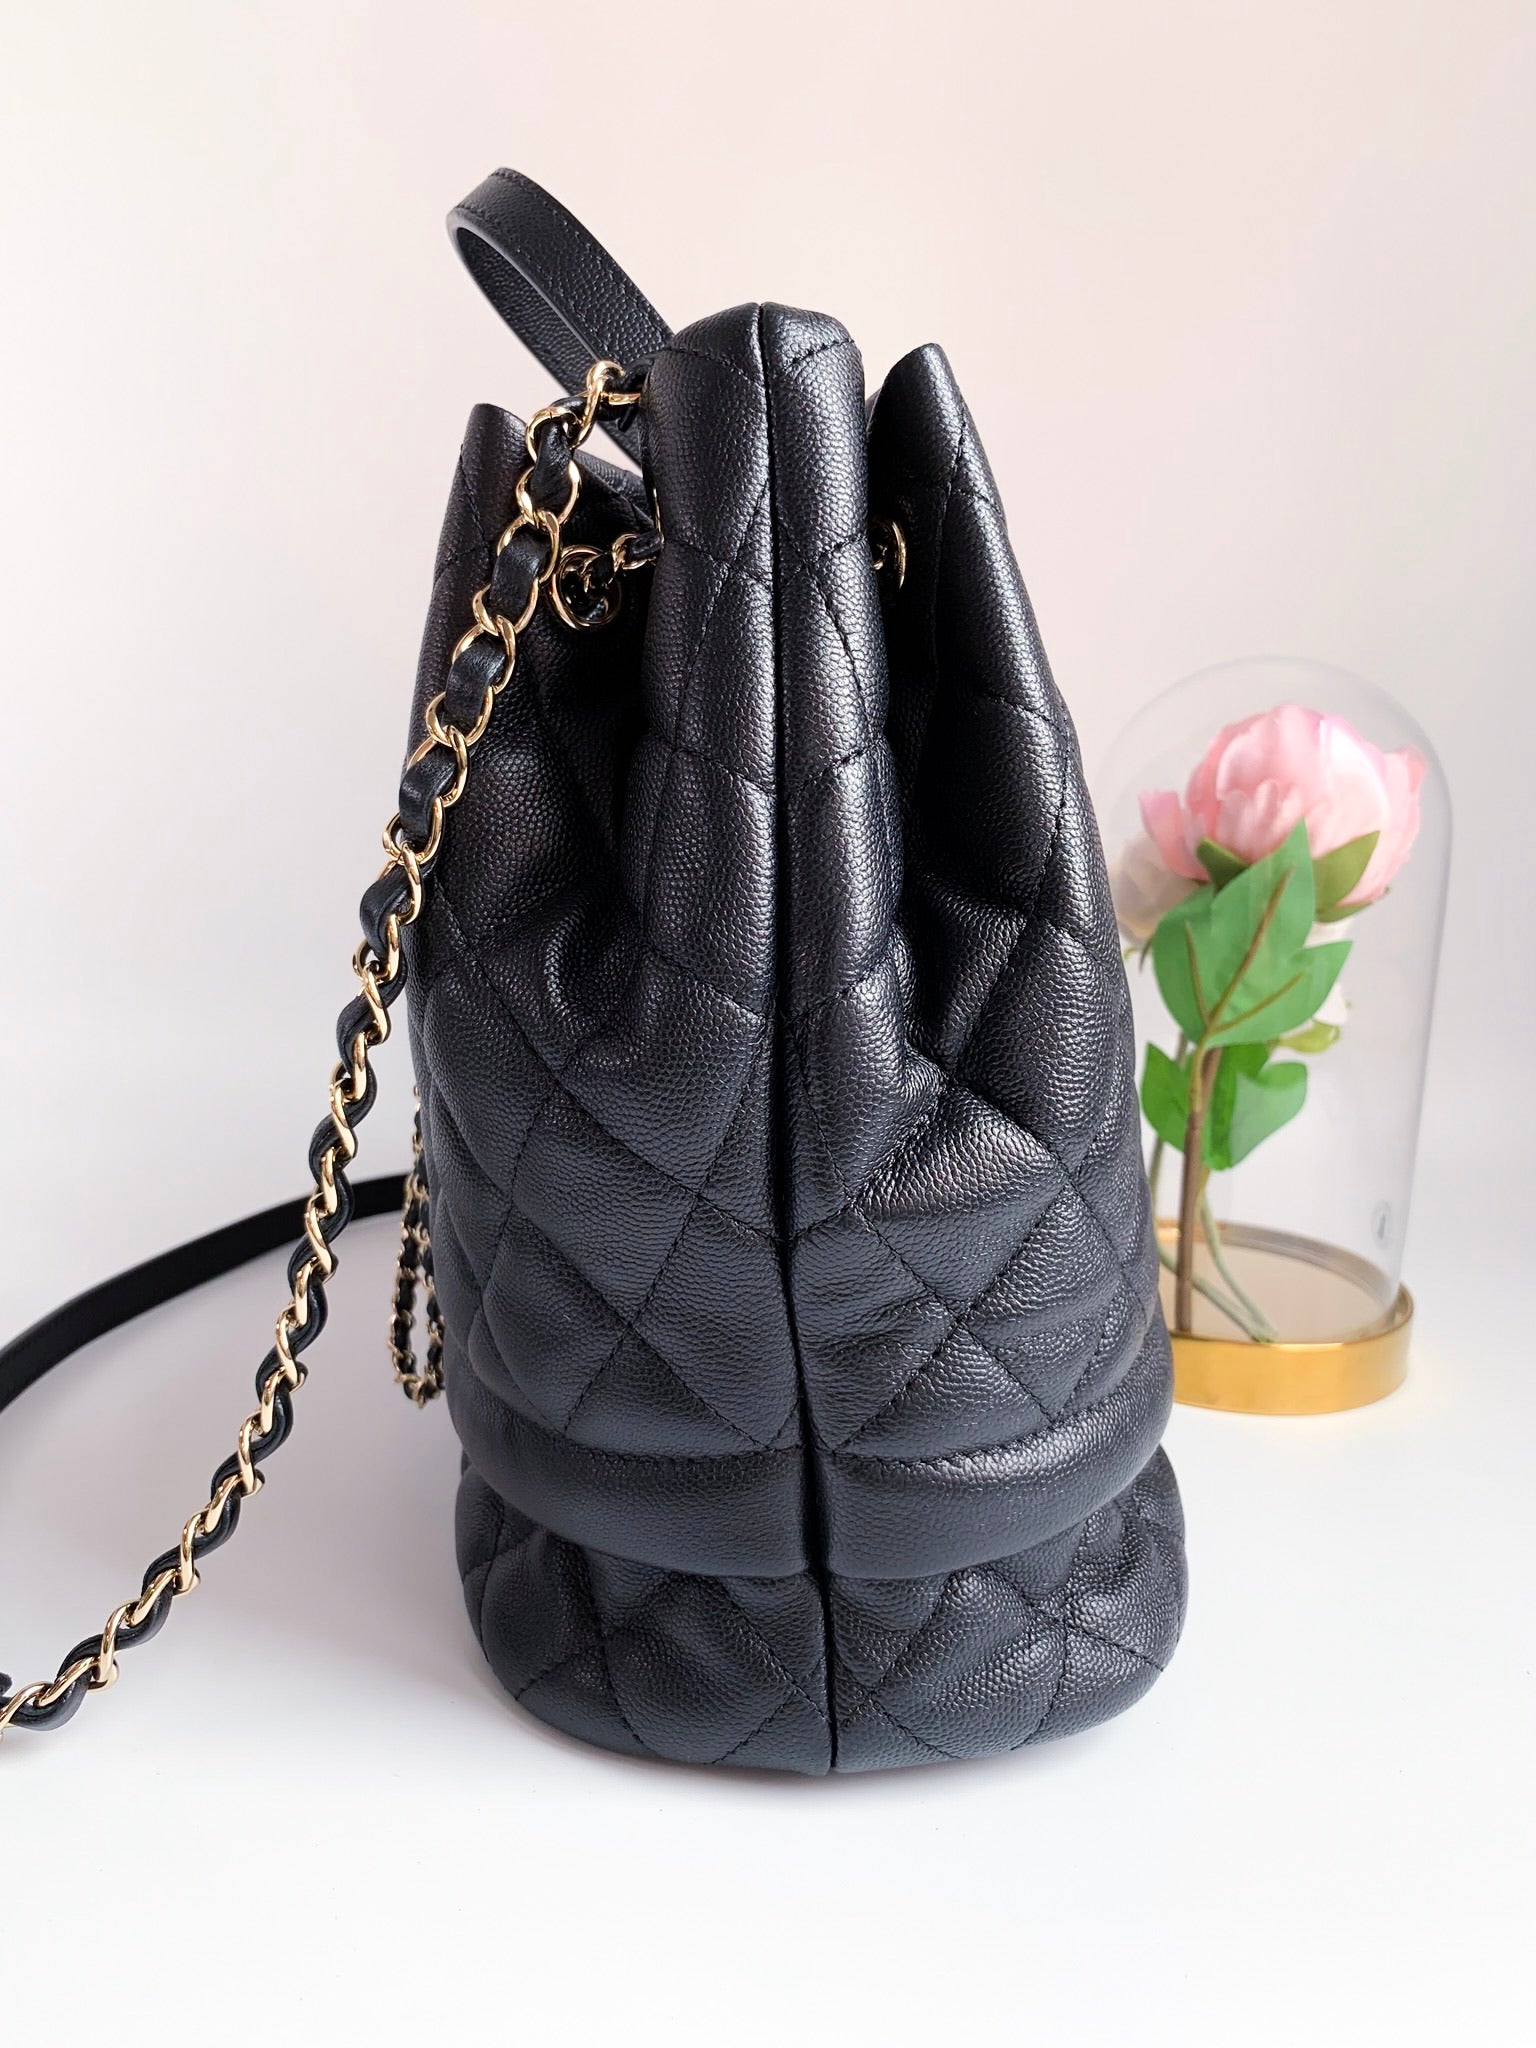 CHANEL Caviar Quilted Small Chain Bucket Bag Black | FASHIONPHILE